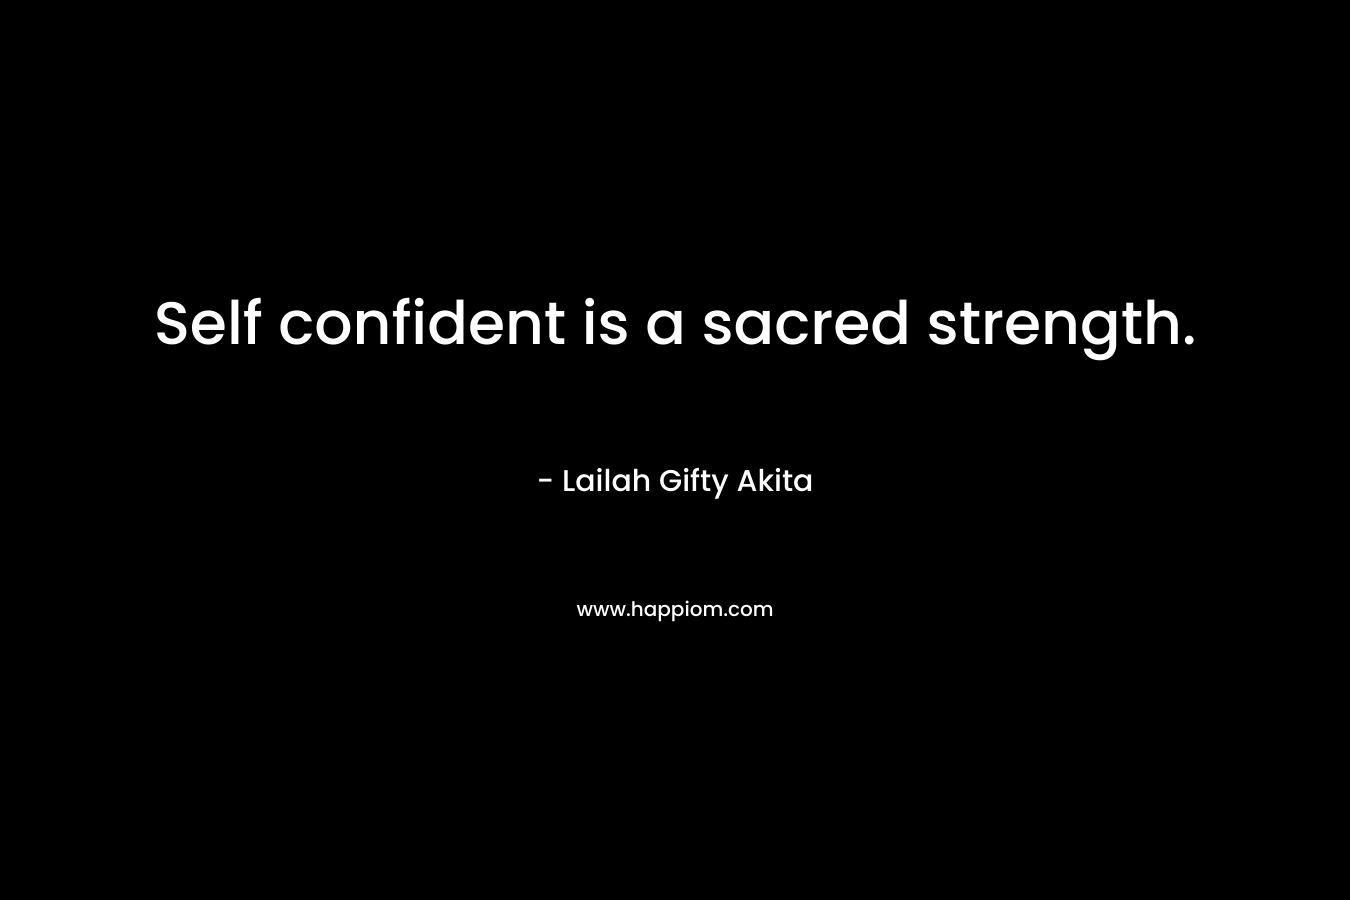 Self confident is a sacred strength.